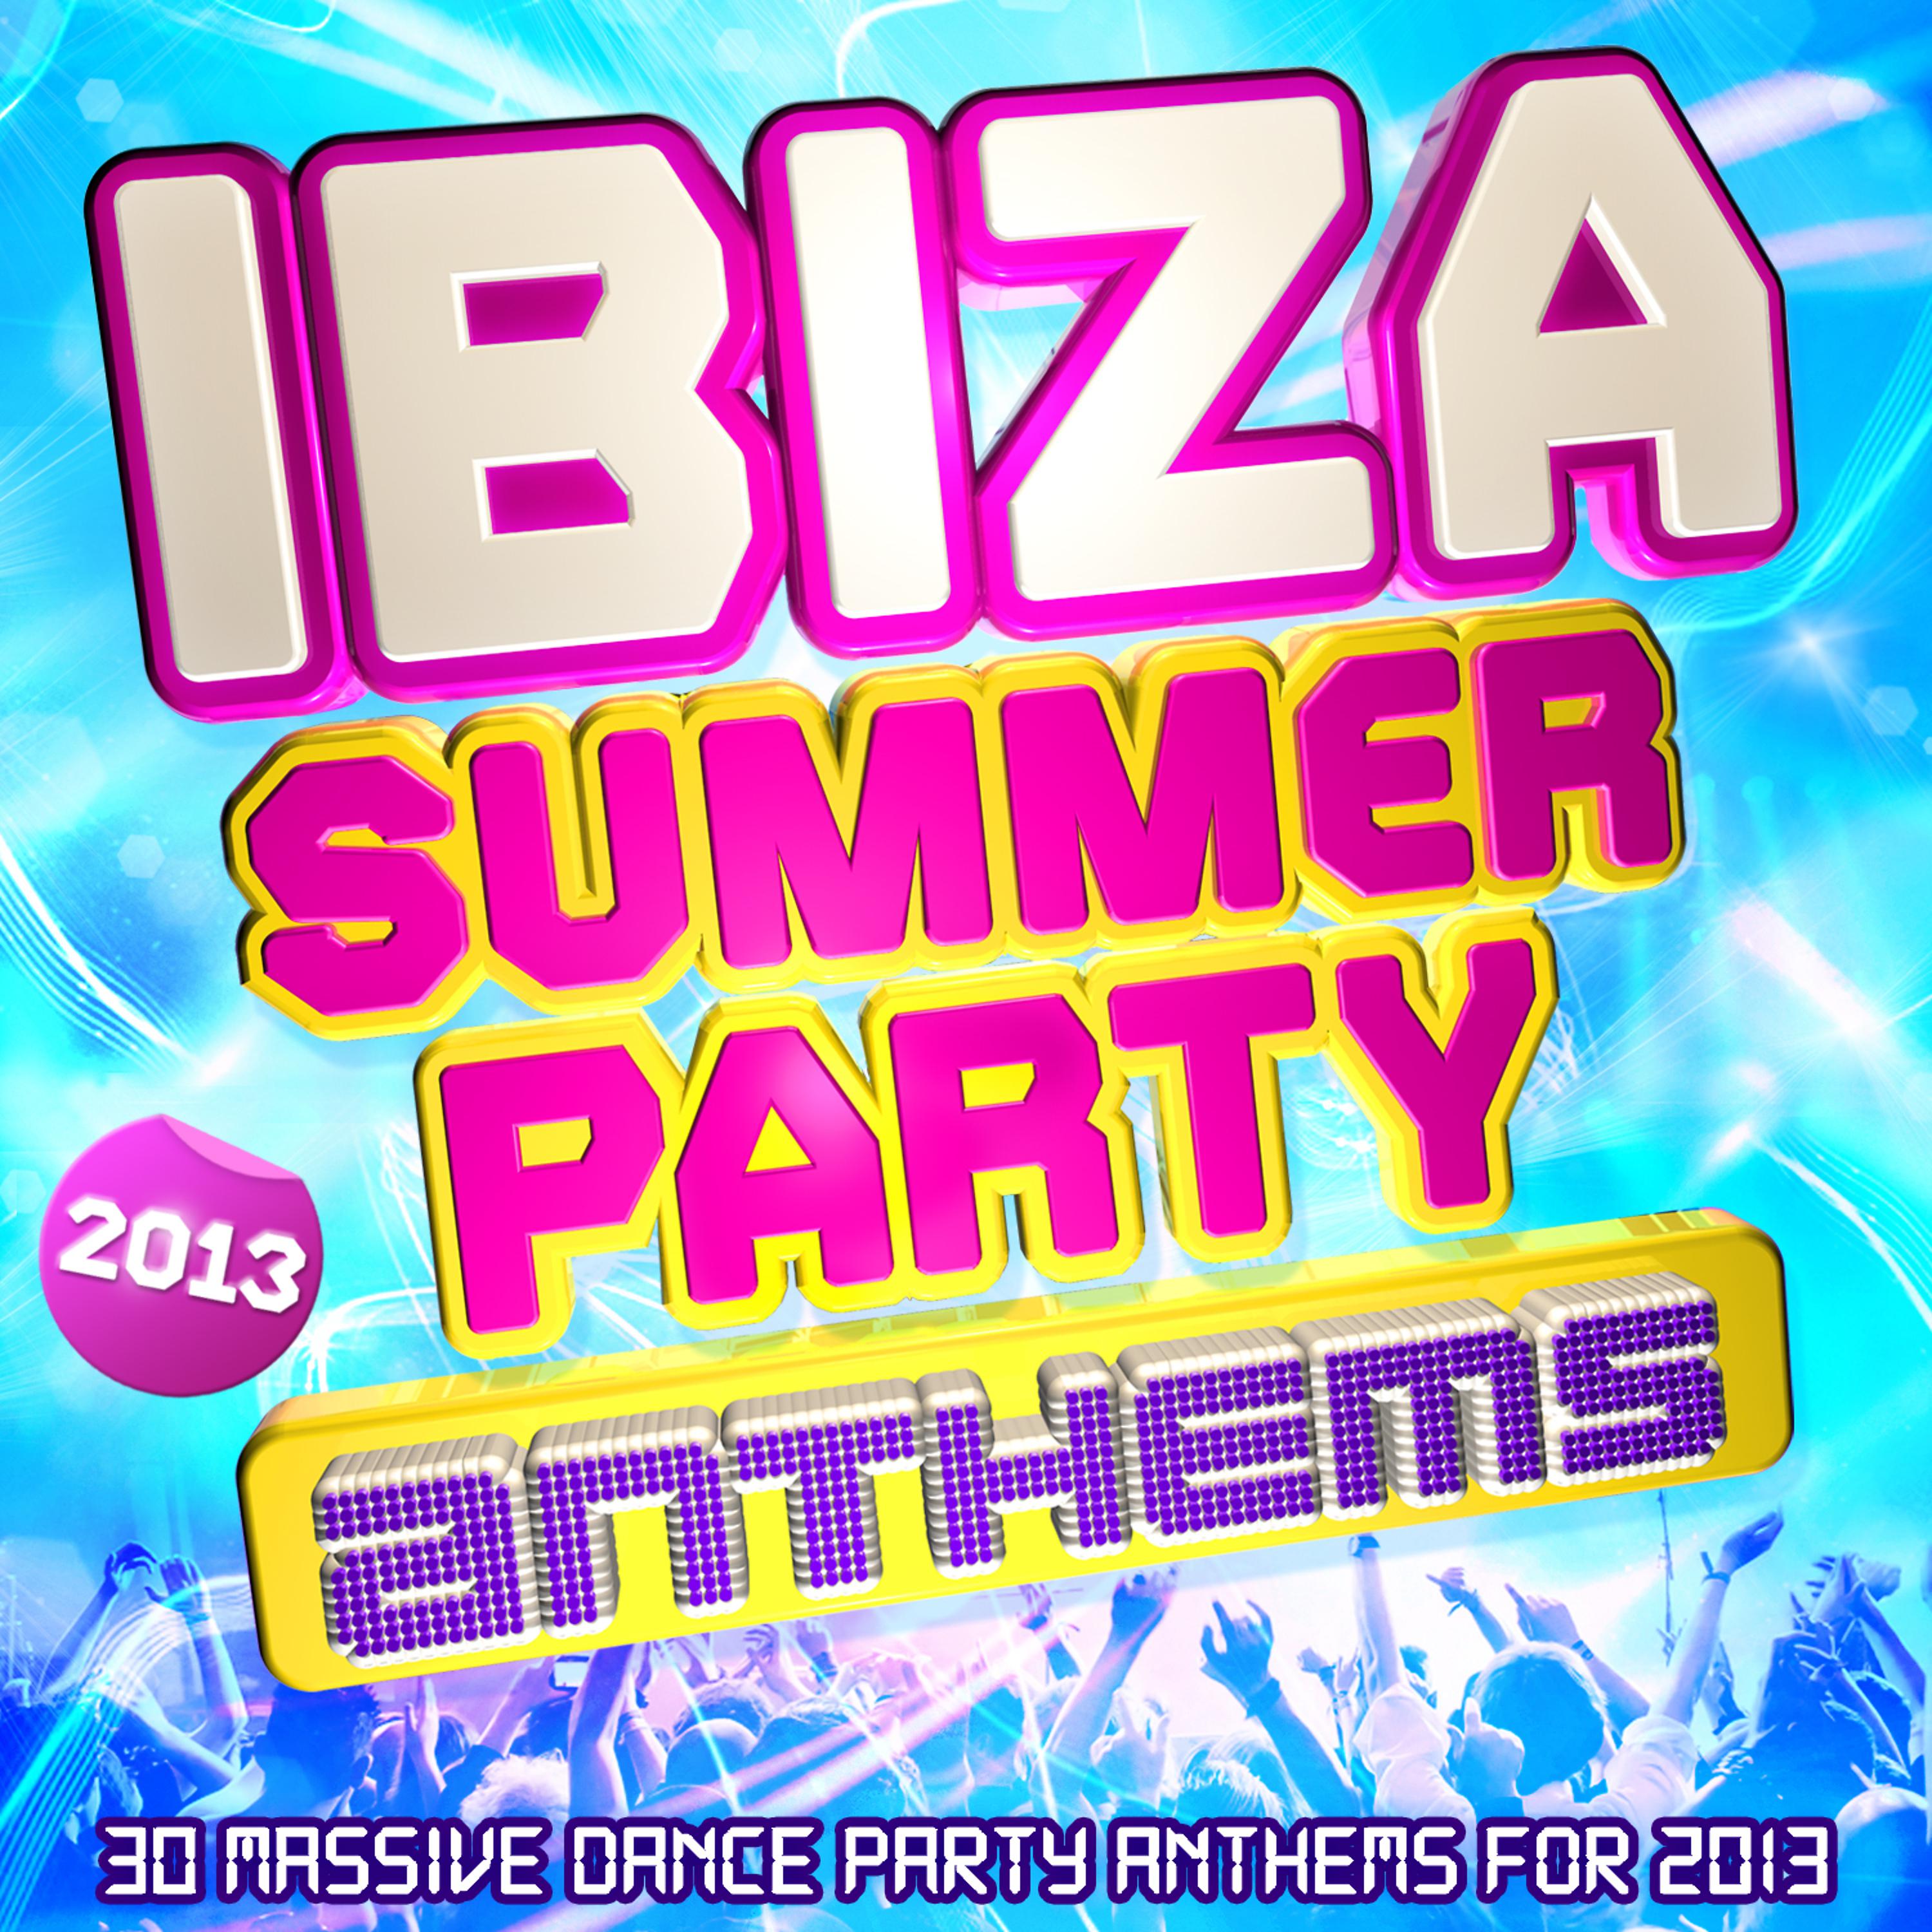 Постер альбома Ibiza Summer Party Anthems 2013 - 30 Massive Dance Party Anthems for 2013